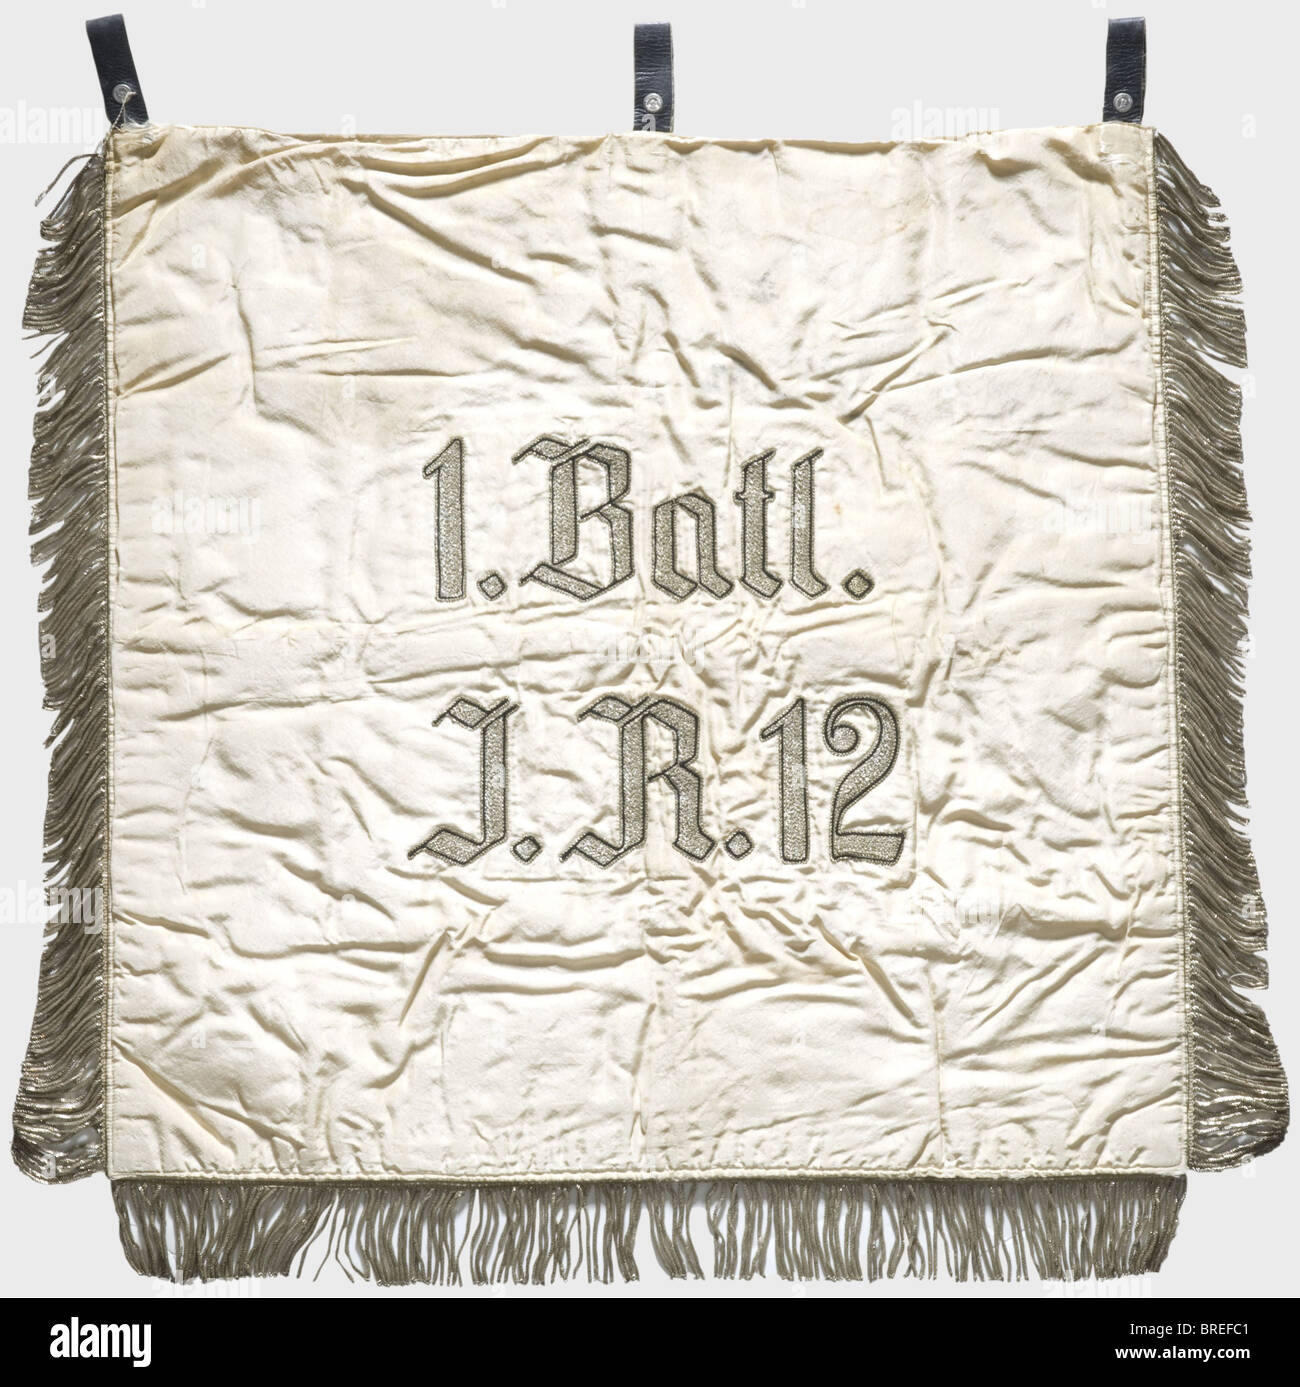 A trumpet banner, of the 1st Battalion/12th Infantry Regiment White silk cloth with an army eagle embroidered in black and brown surrounded by a silver-embroidered oak leaf wreath over an iron cross and four applied swastikas in the corners. Silver fringes on three sides. Three leather loops. On the reverse side the silver-embroidered unit name. Dimensions ca. 53 x 56 cm. Slightly stained, otherwise in very good condition with bright colours. Of great rarity. historic, historical, 1930s, 1930s, 20th century, infantry, military, armed forces, militaria, object, , Stock Photo